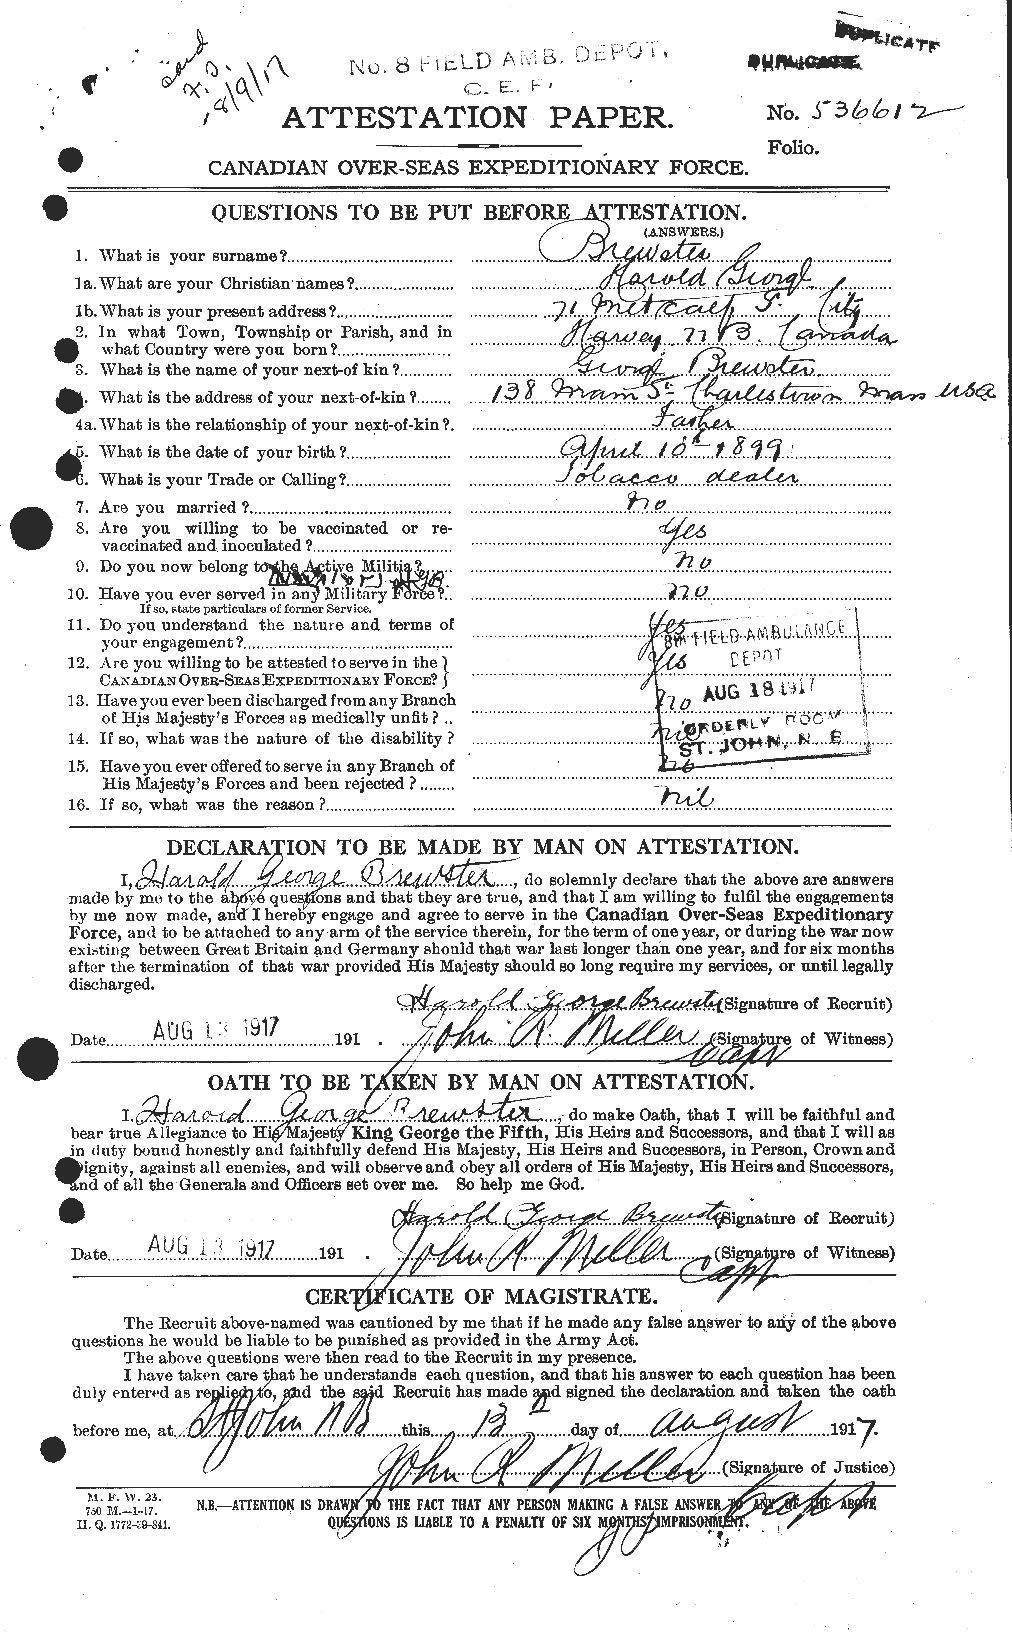 Personnel Records of the First World War - CEF 260879a